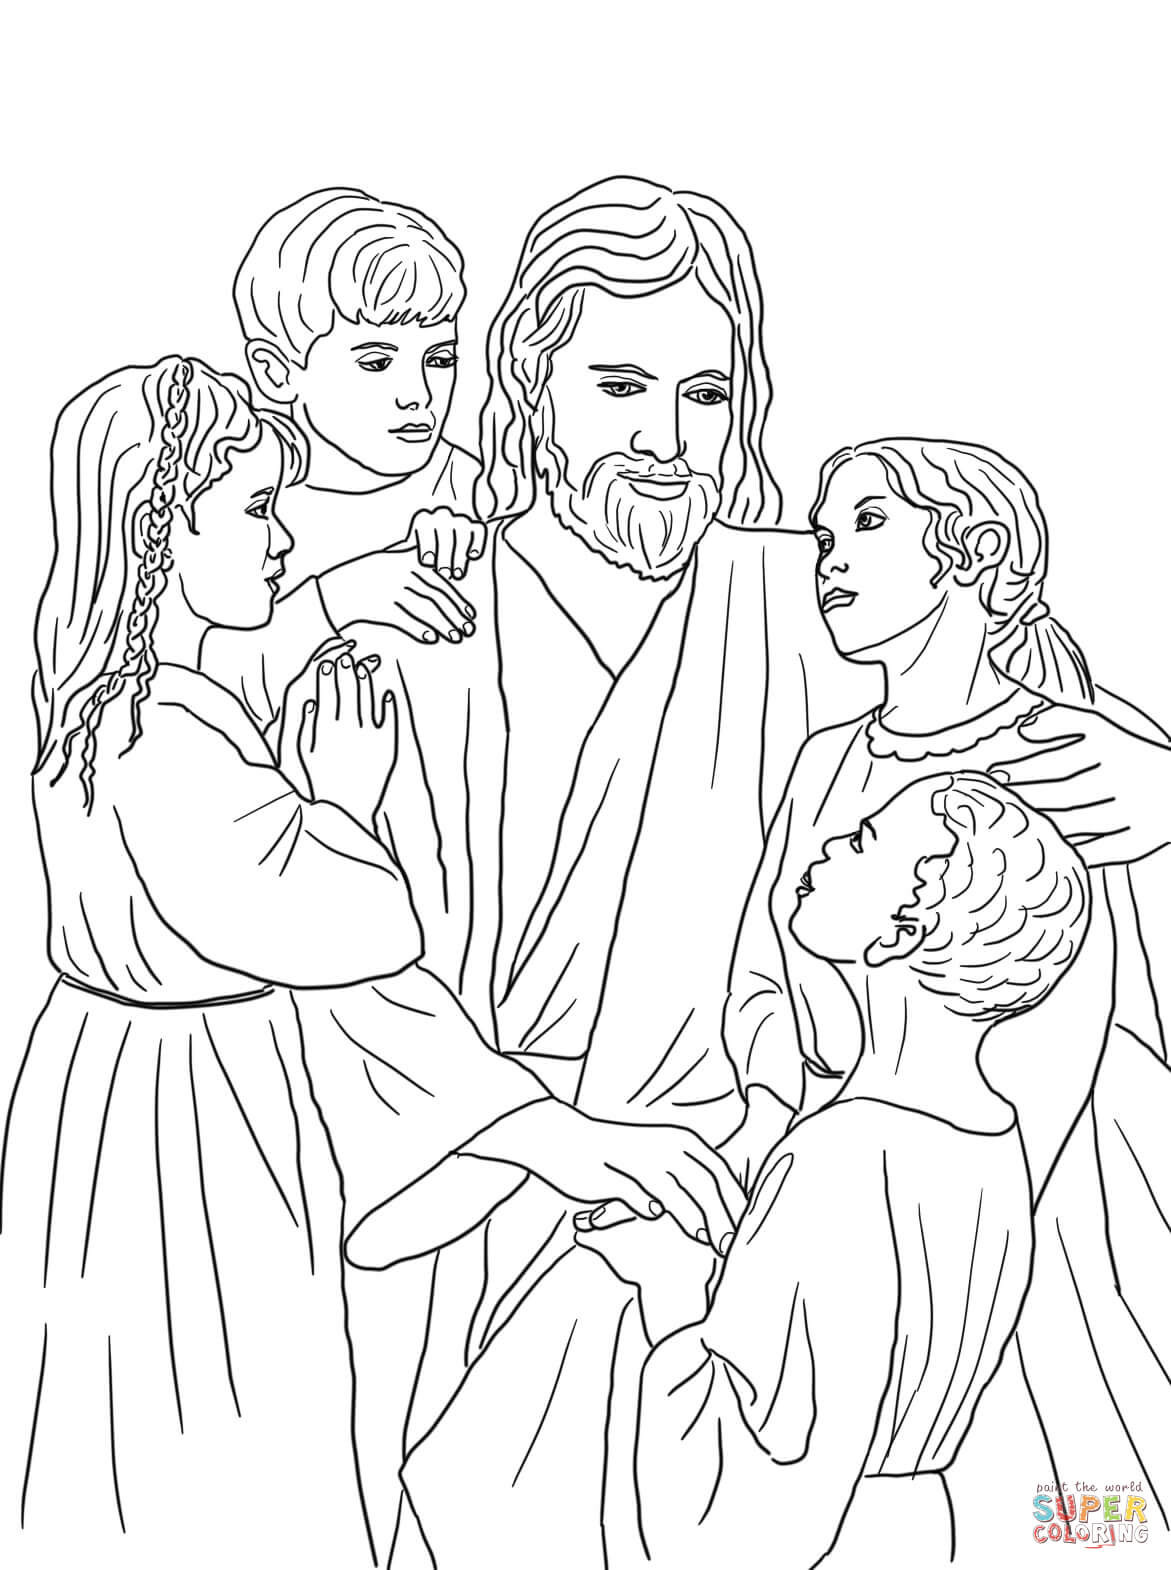 Jesus And The Children Coloring Page
 Jesus Loves All the Children of the World coloring page